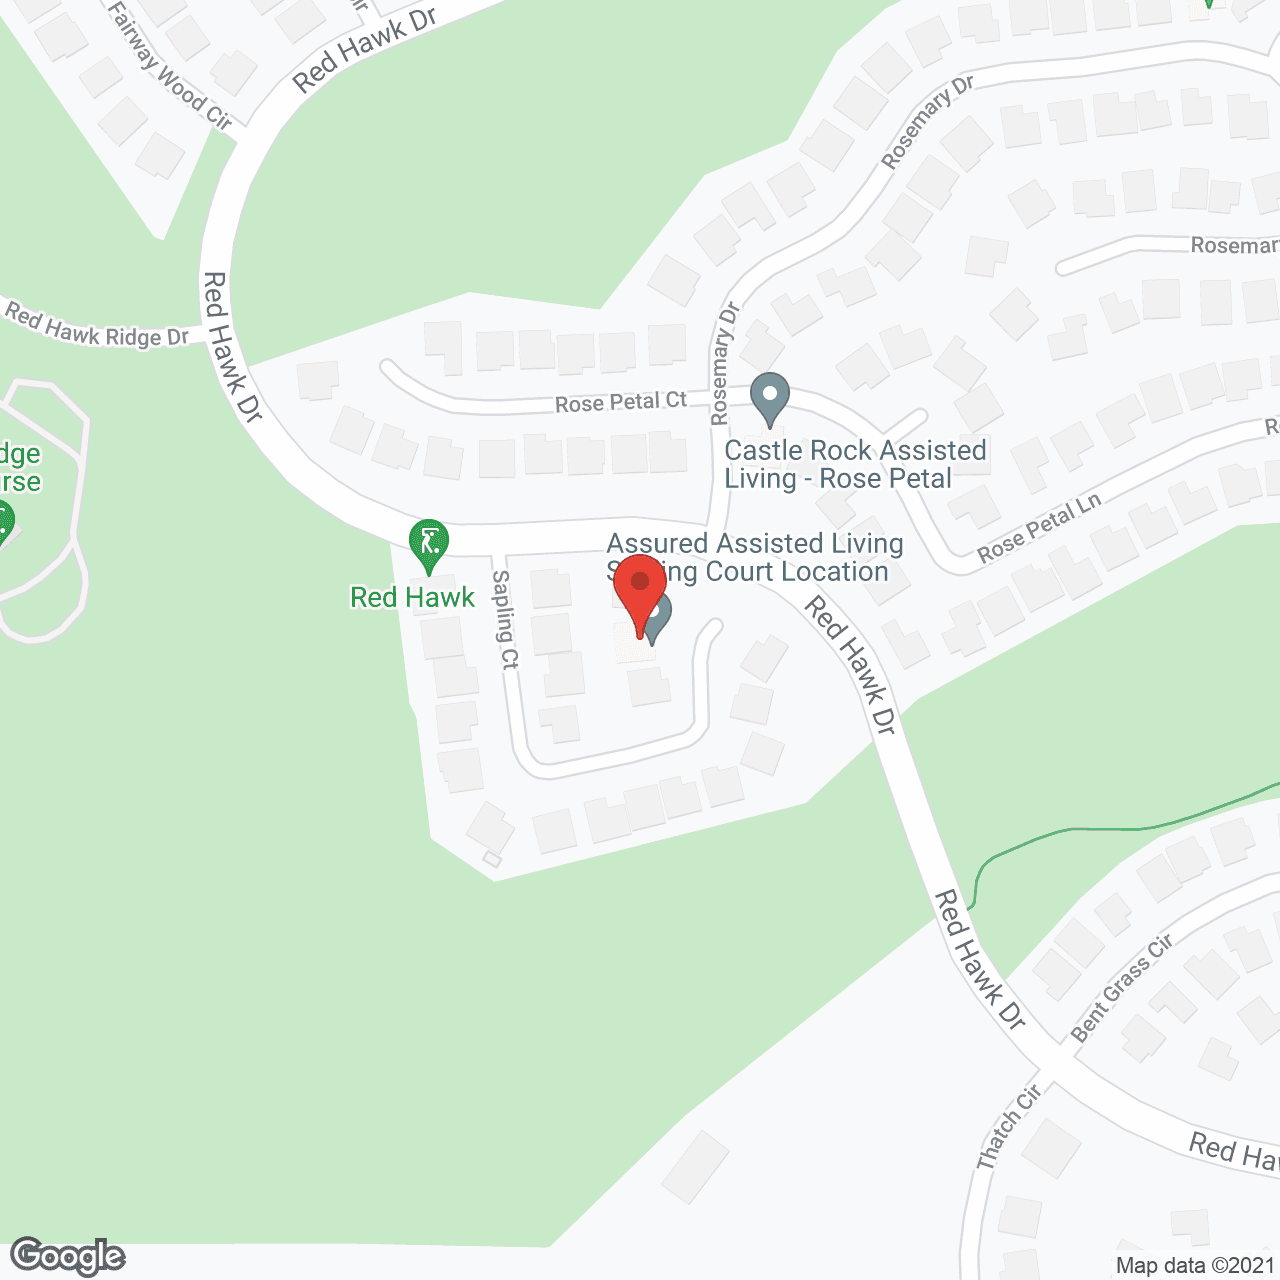 Assured Assisted Living 4 in google map